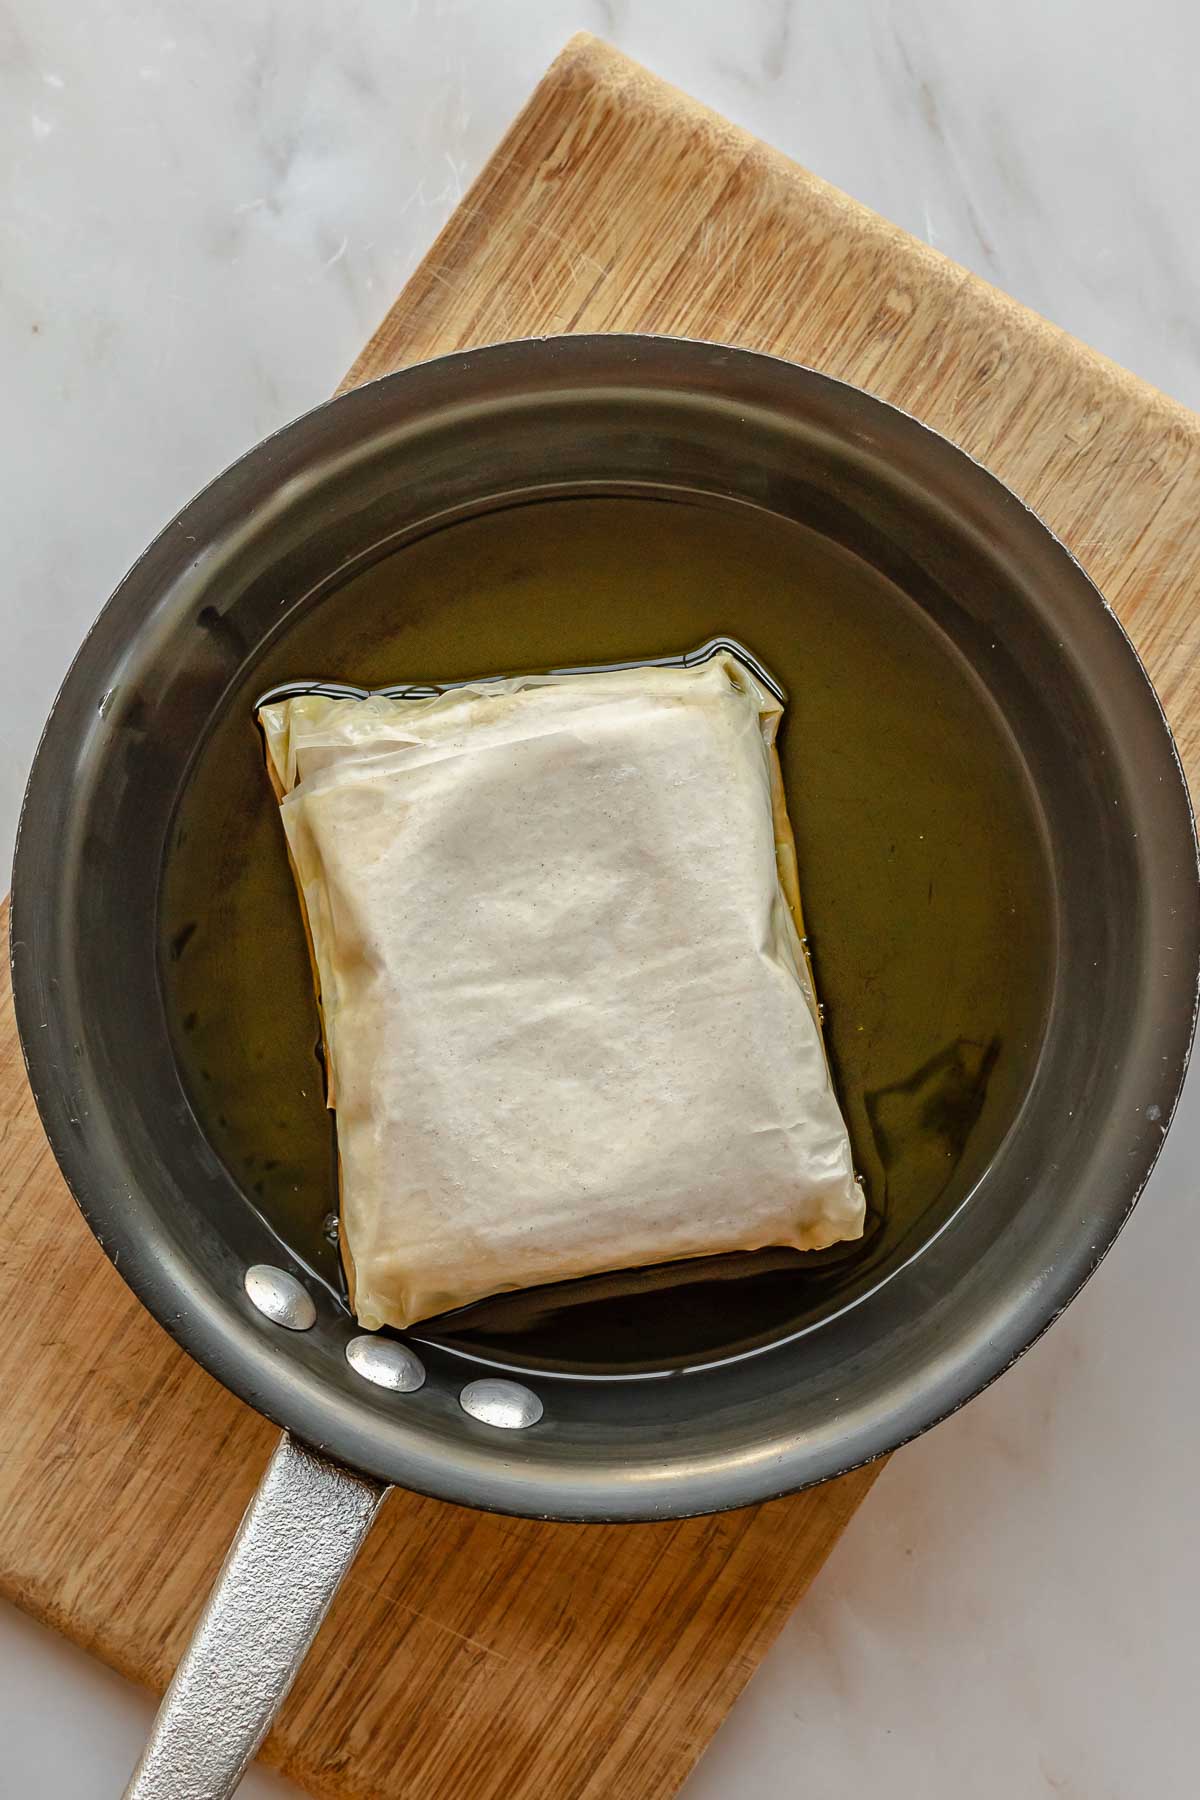 A block of phyllo wrapped feta in a pan of olive oil.